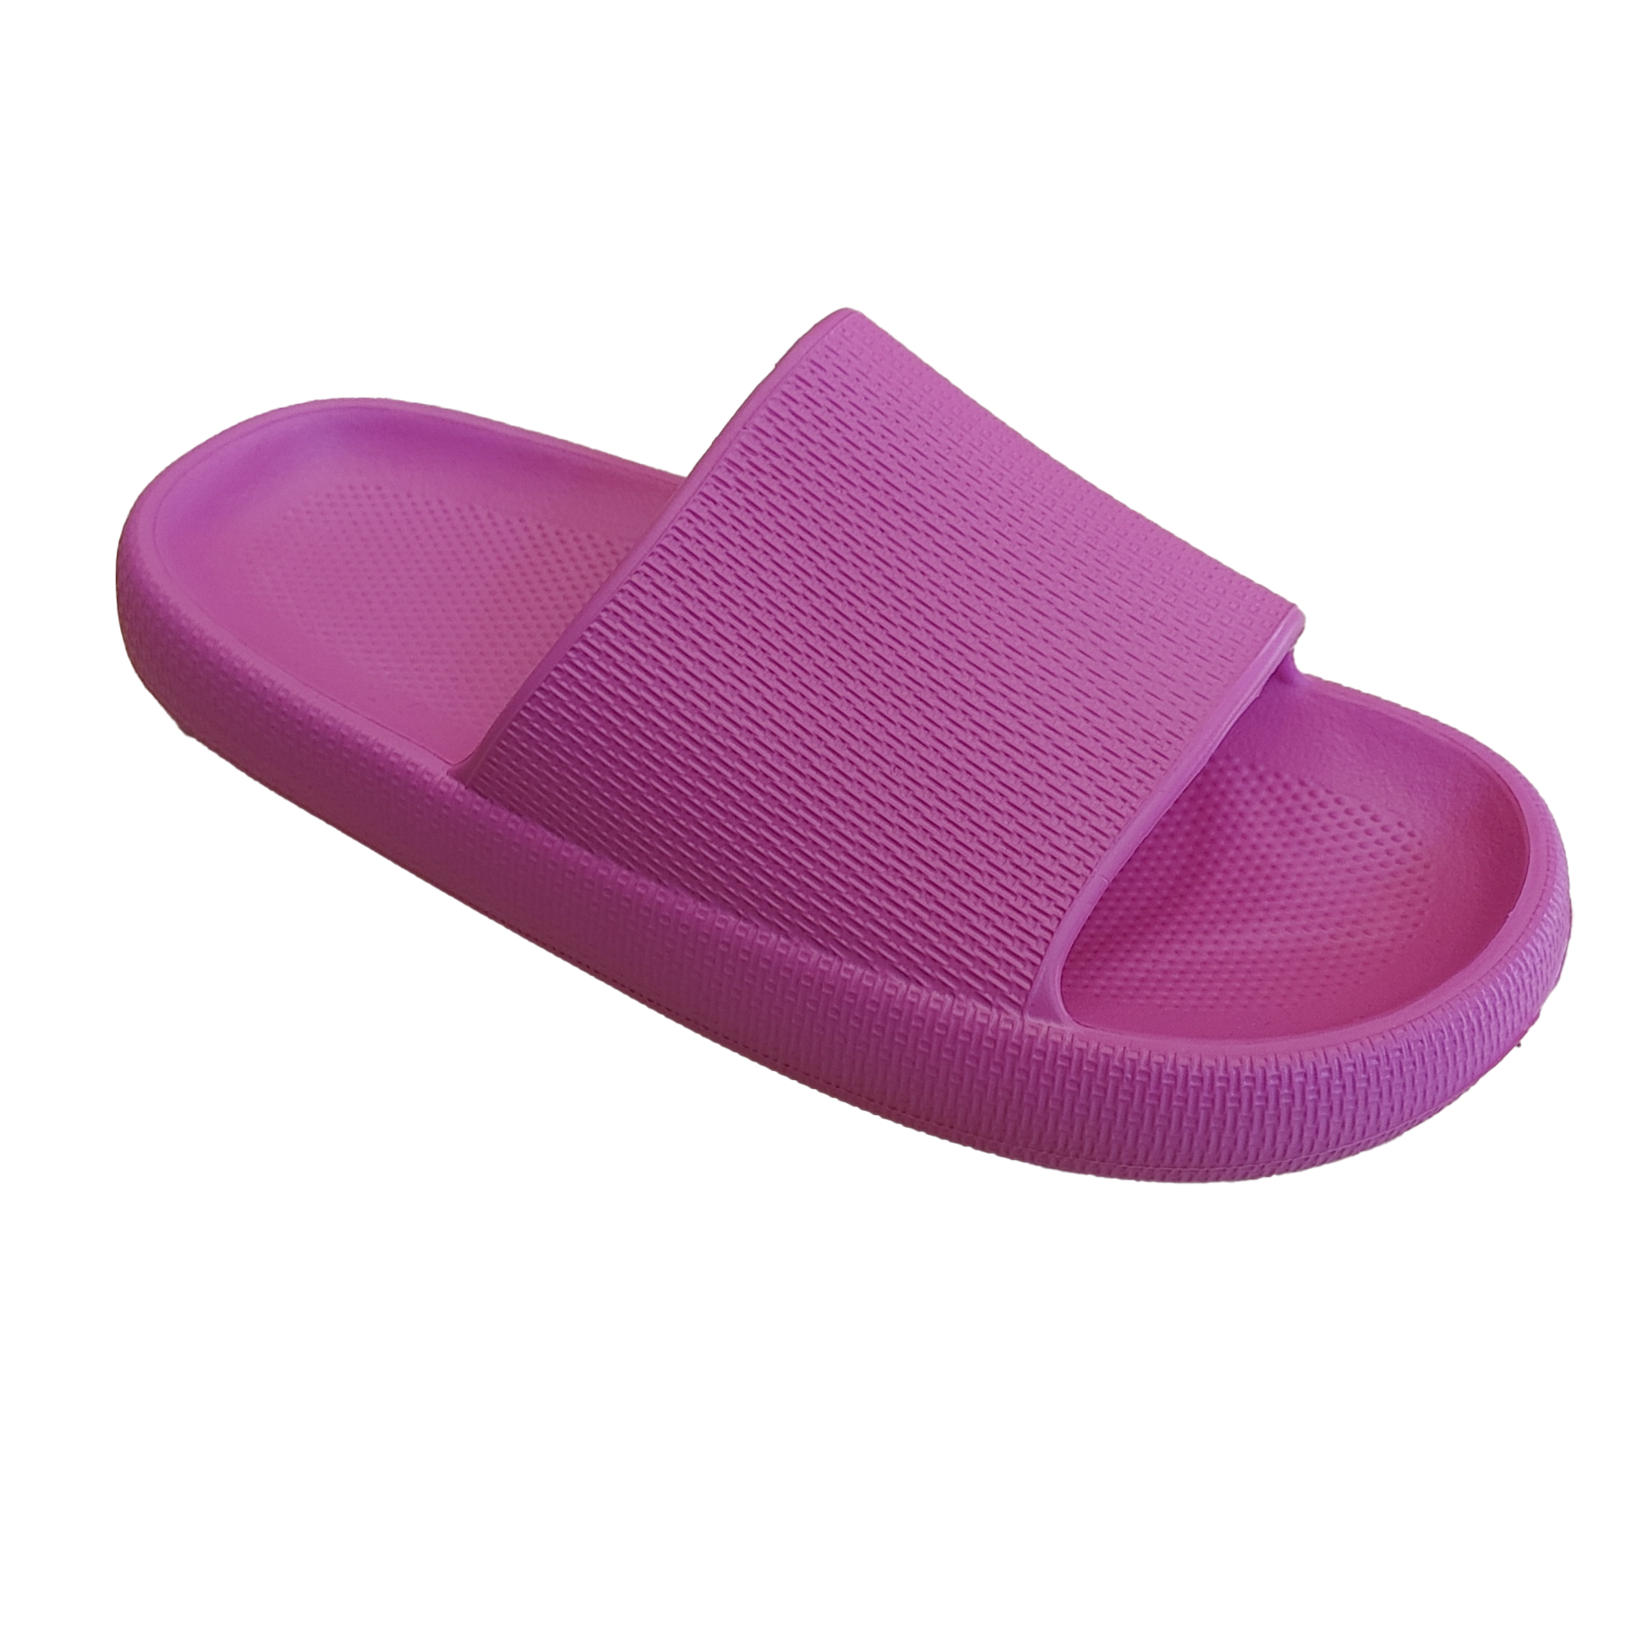 NYC NYC thick sole slip on sandal, sandals, water shoe,